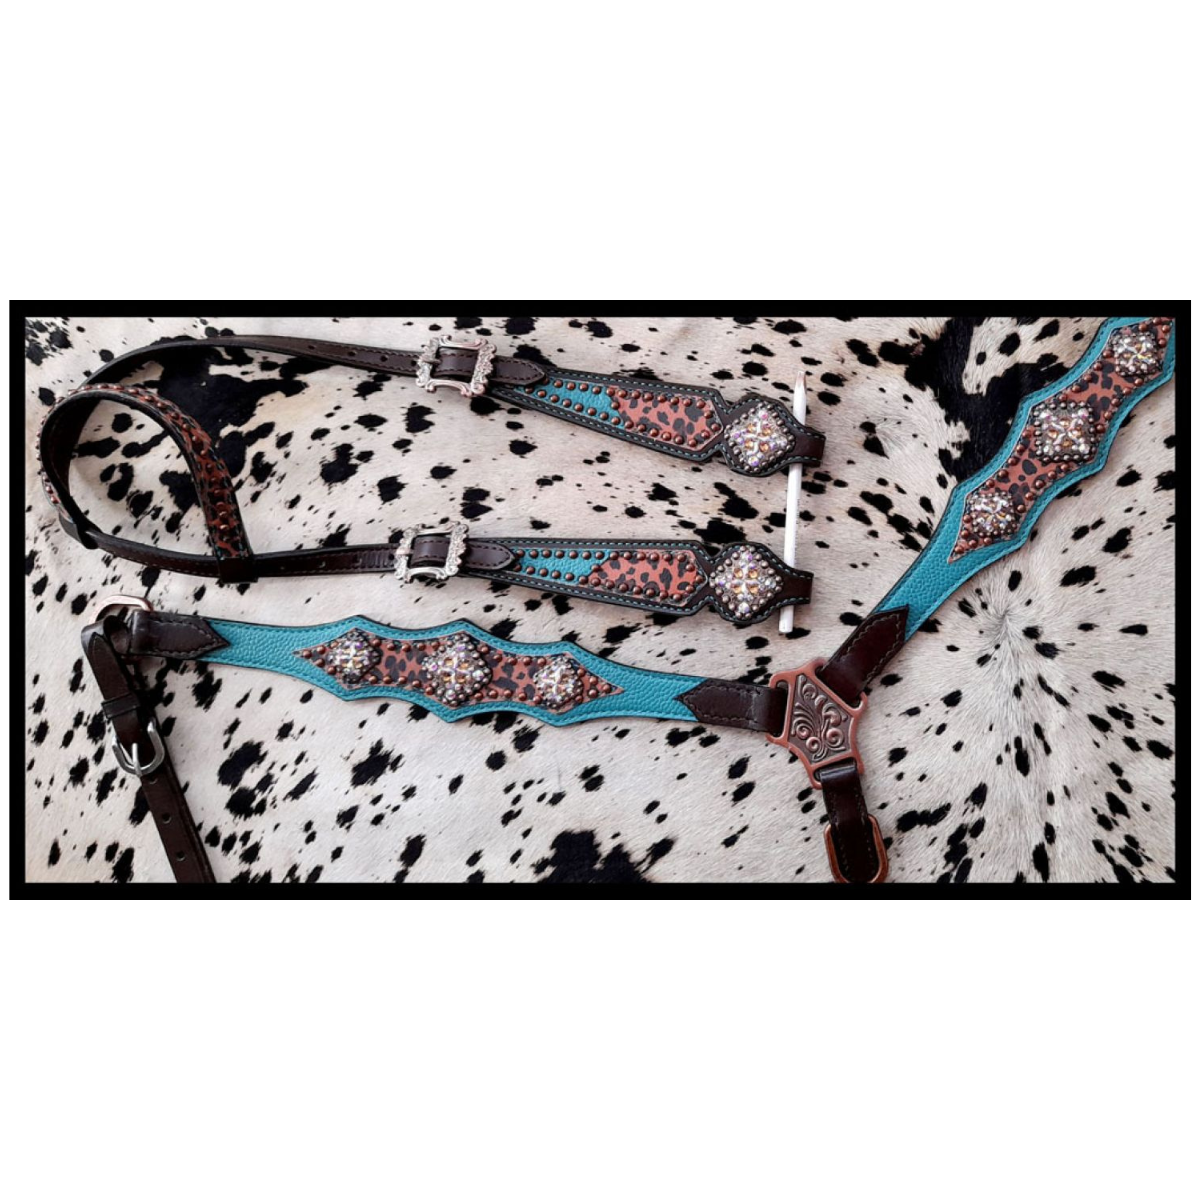 Showman ® Cheetah print overlay with teal leather accent One Ear headstall and breast collar set. - Double T Saddles